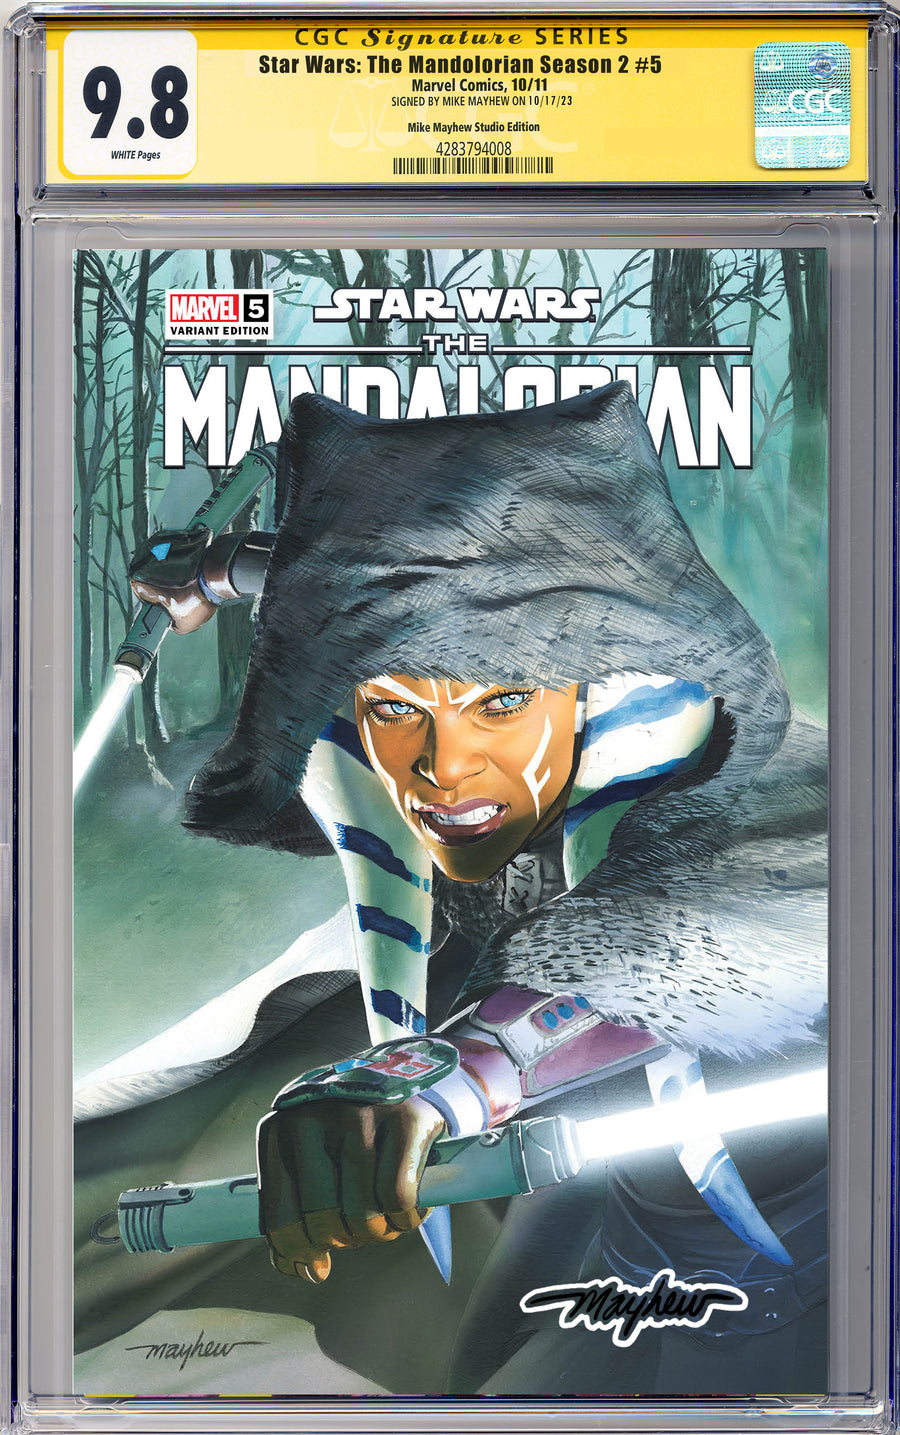 STAR WARS: THE MANDALORIAN SEASON 2 #5 Mike Mayhew Studio Variant Cover A Trade Dress Darksaber Glow Sig CGC Yellow Label 9.6 and Above Graded Slab